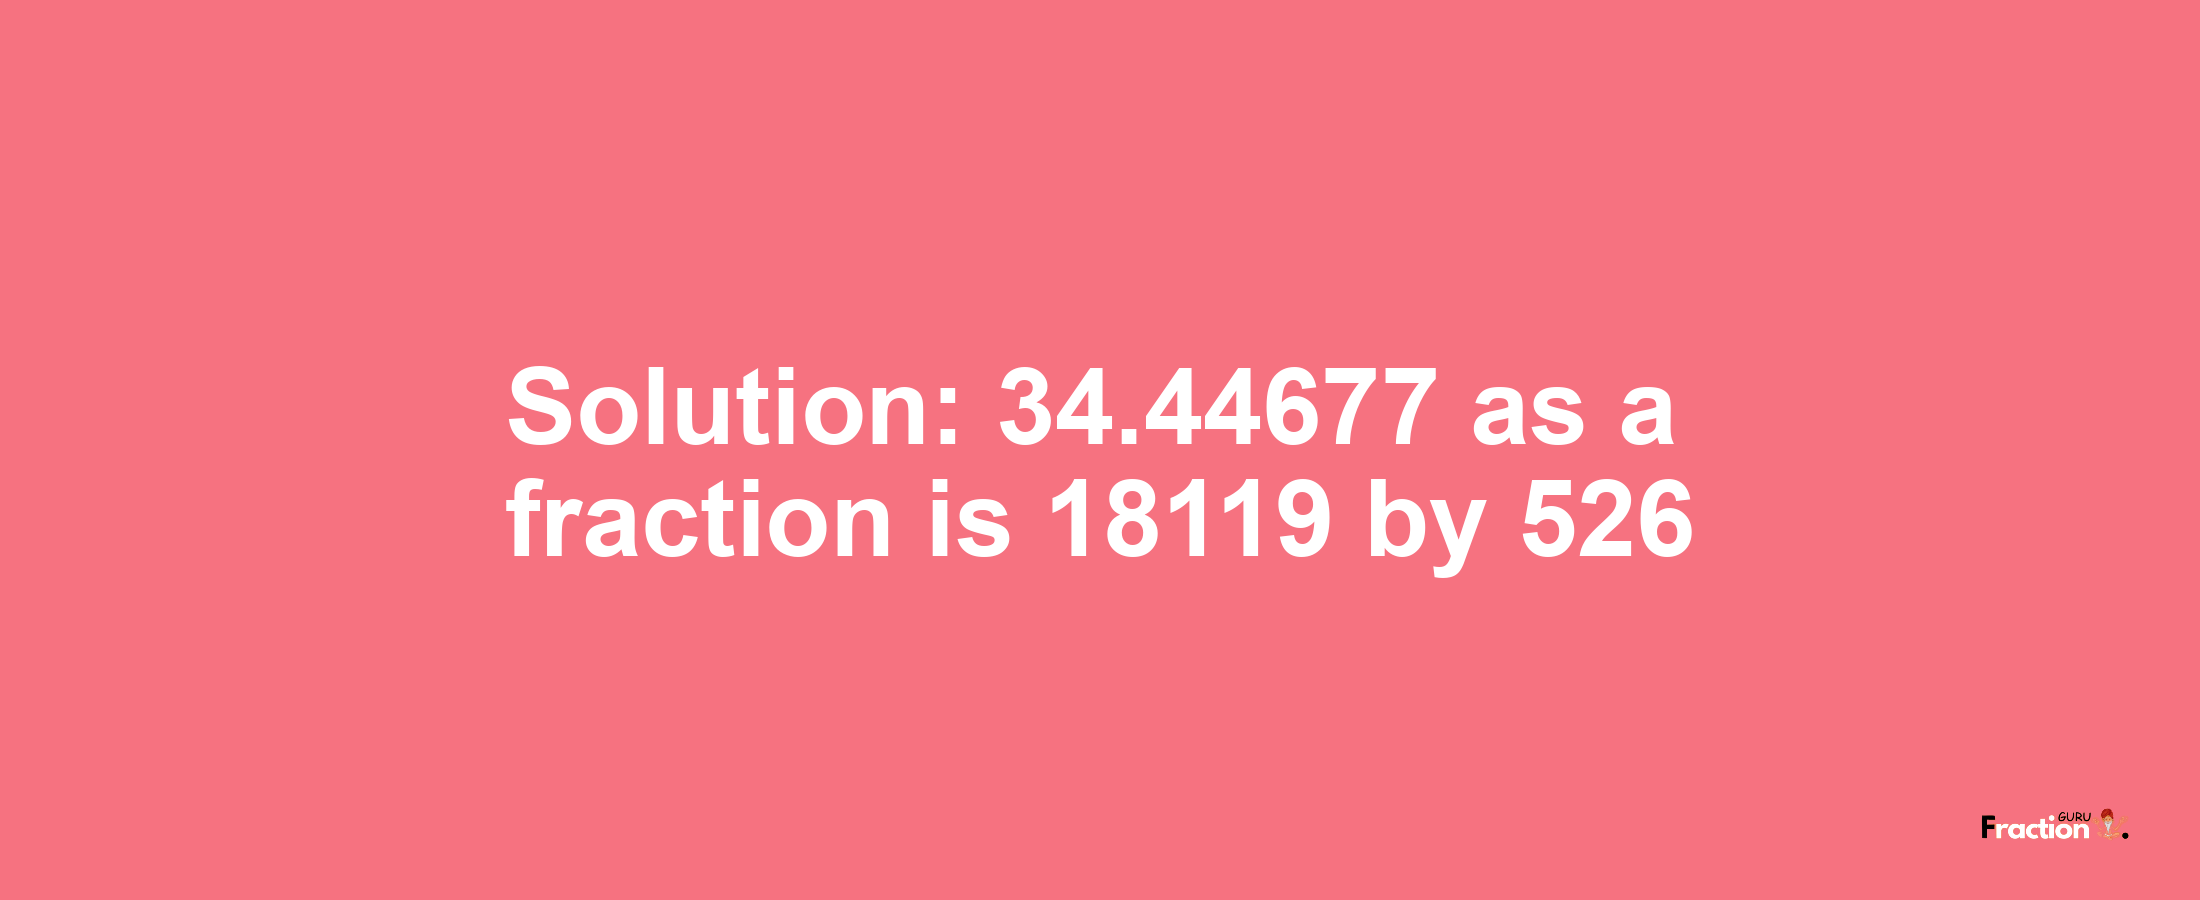 Solution:34.44677 as a fraction is 18119/526